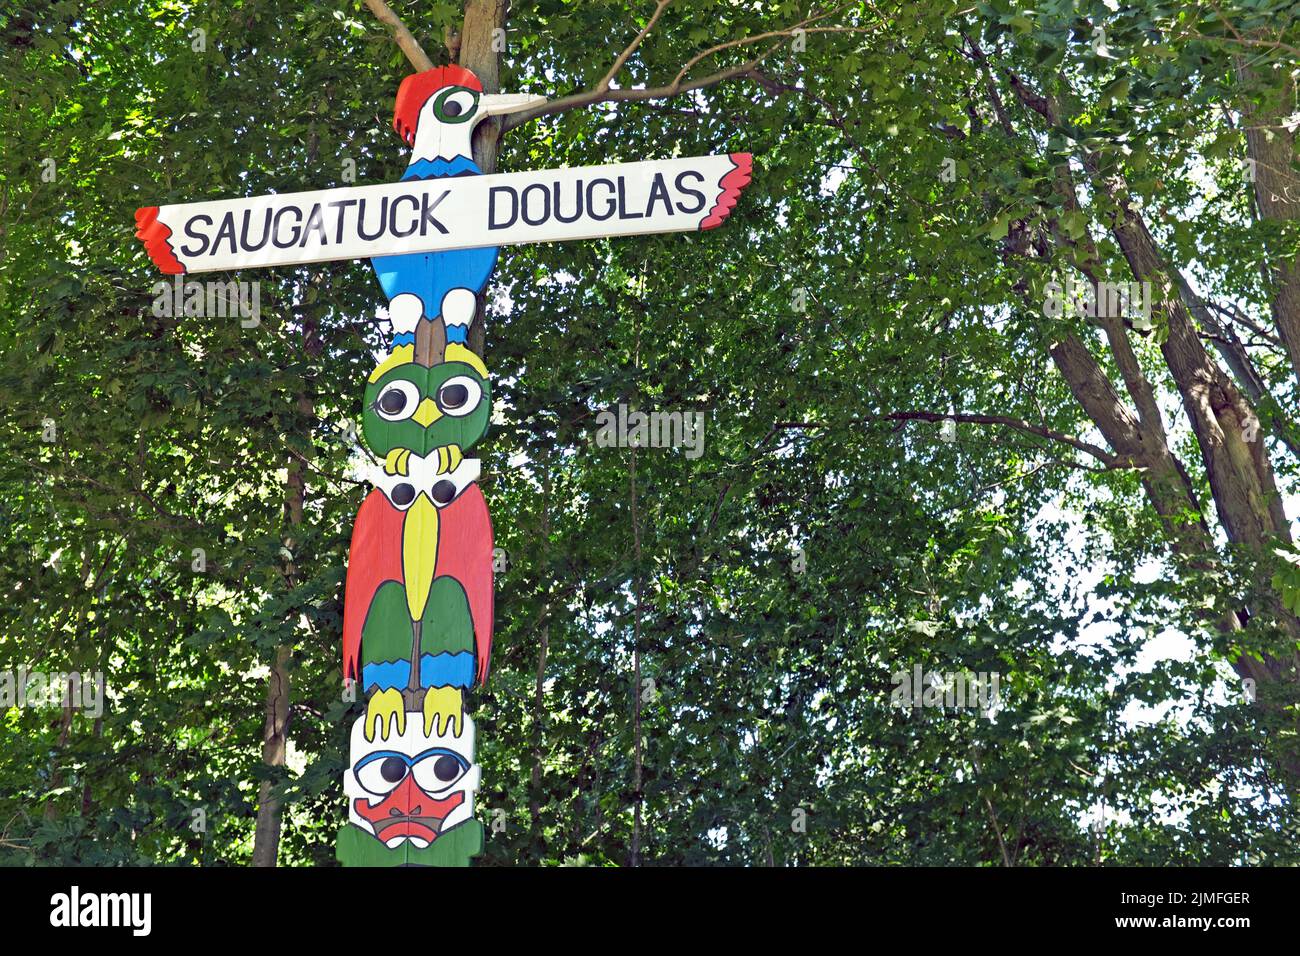 Designed in the 1960's by Deb Reeves purposely created to attract tourists to Saugatuck Douglas, Michigan, USA. Stock Photo